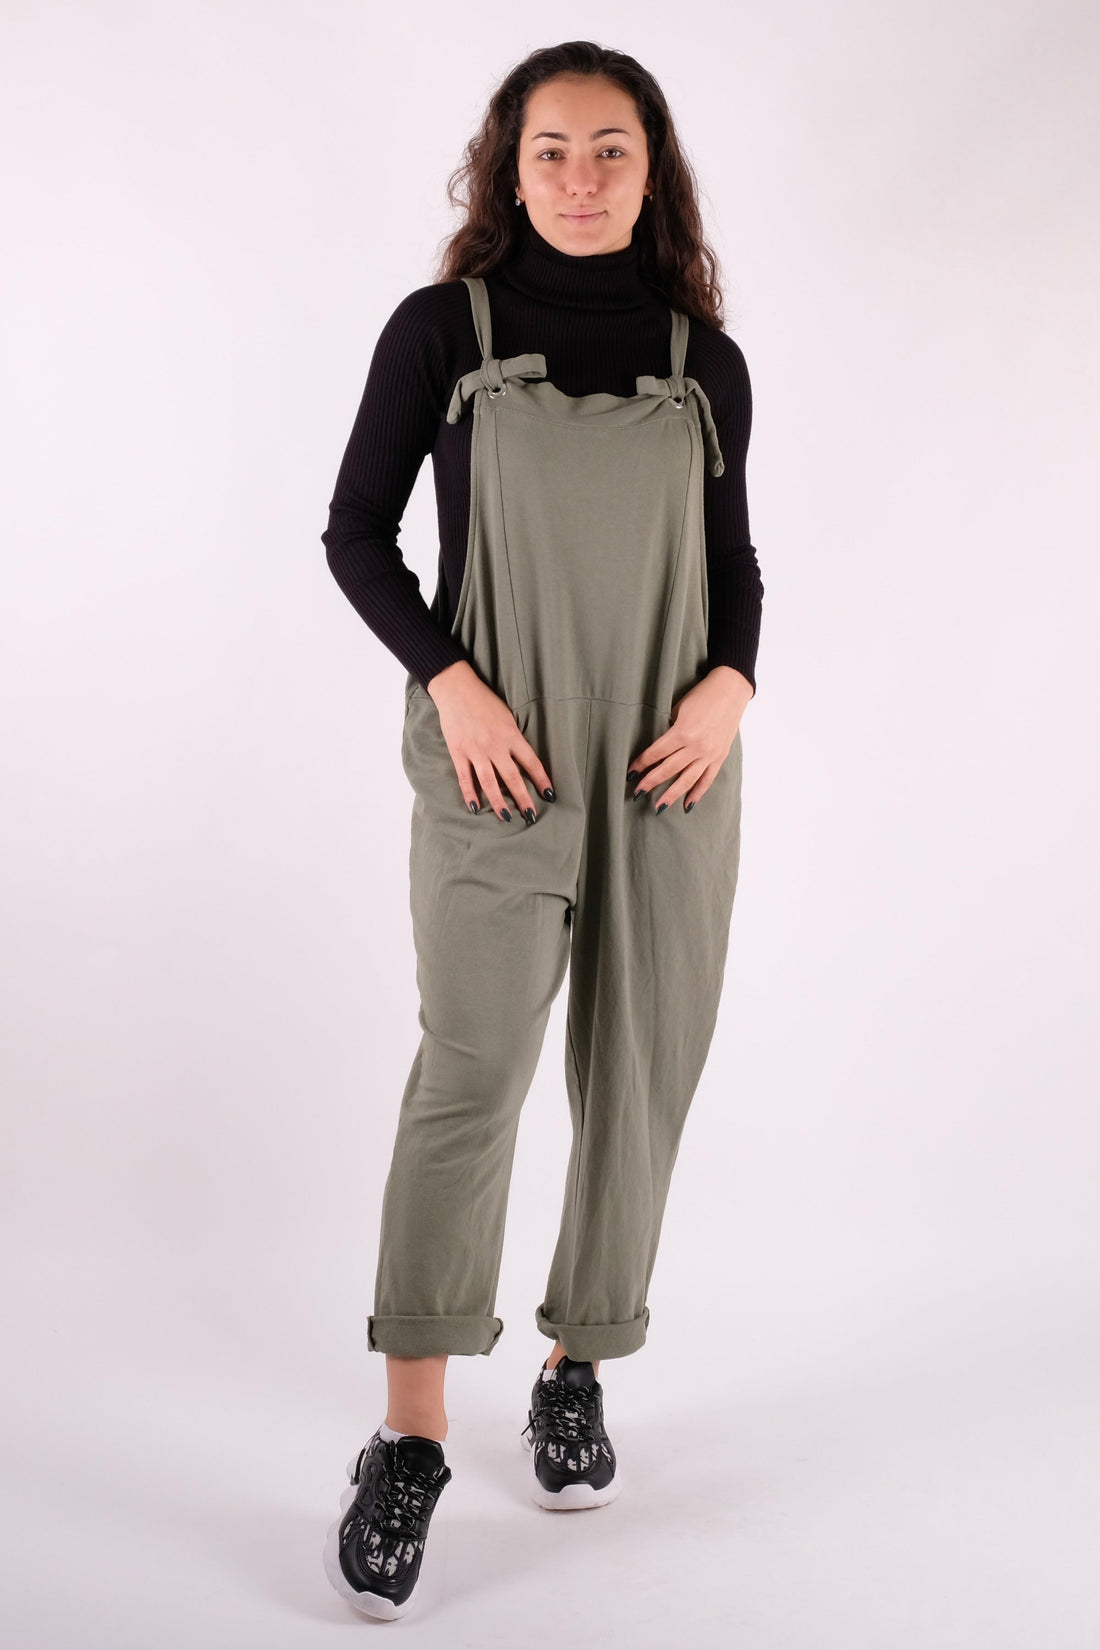 Plain Dungarees 3/4 Length With Chrome Loop Hole - Pinstripe